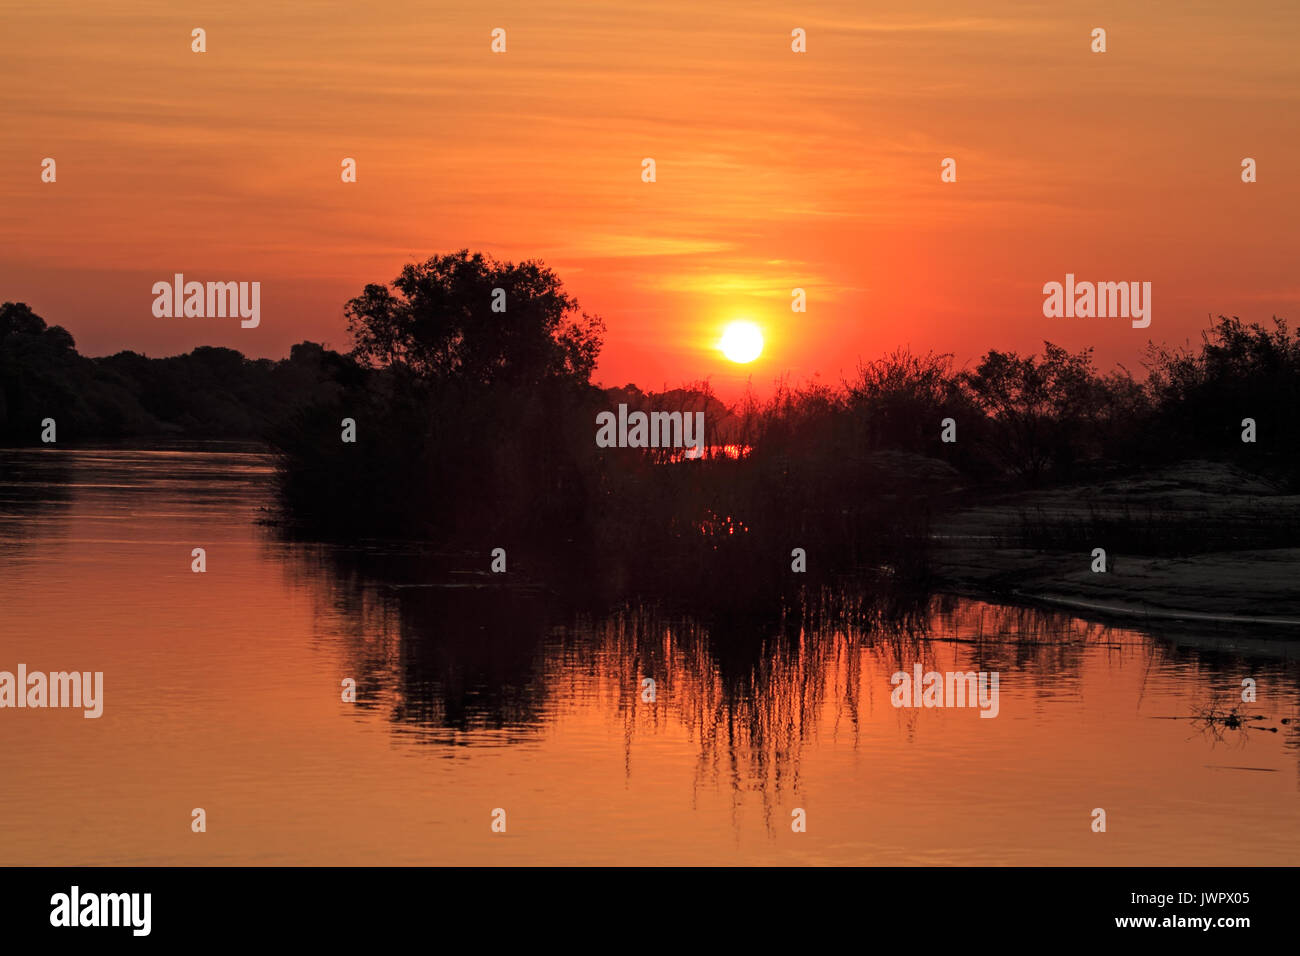 Sunset with silhouetted trees reflected in the water, Zambezi river, Namibia Stock Photo